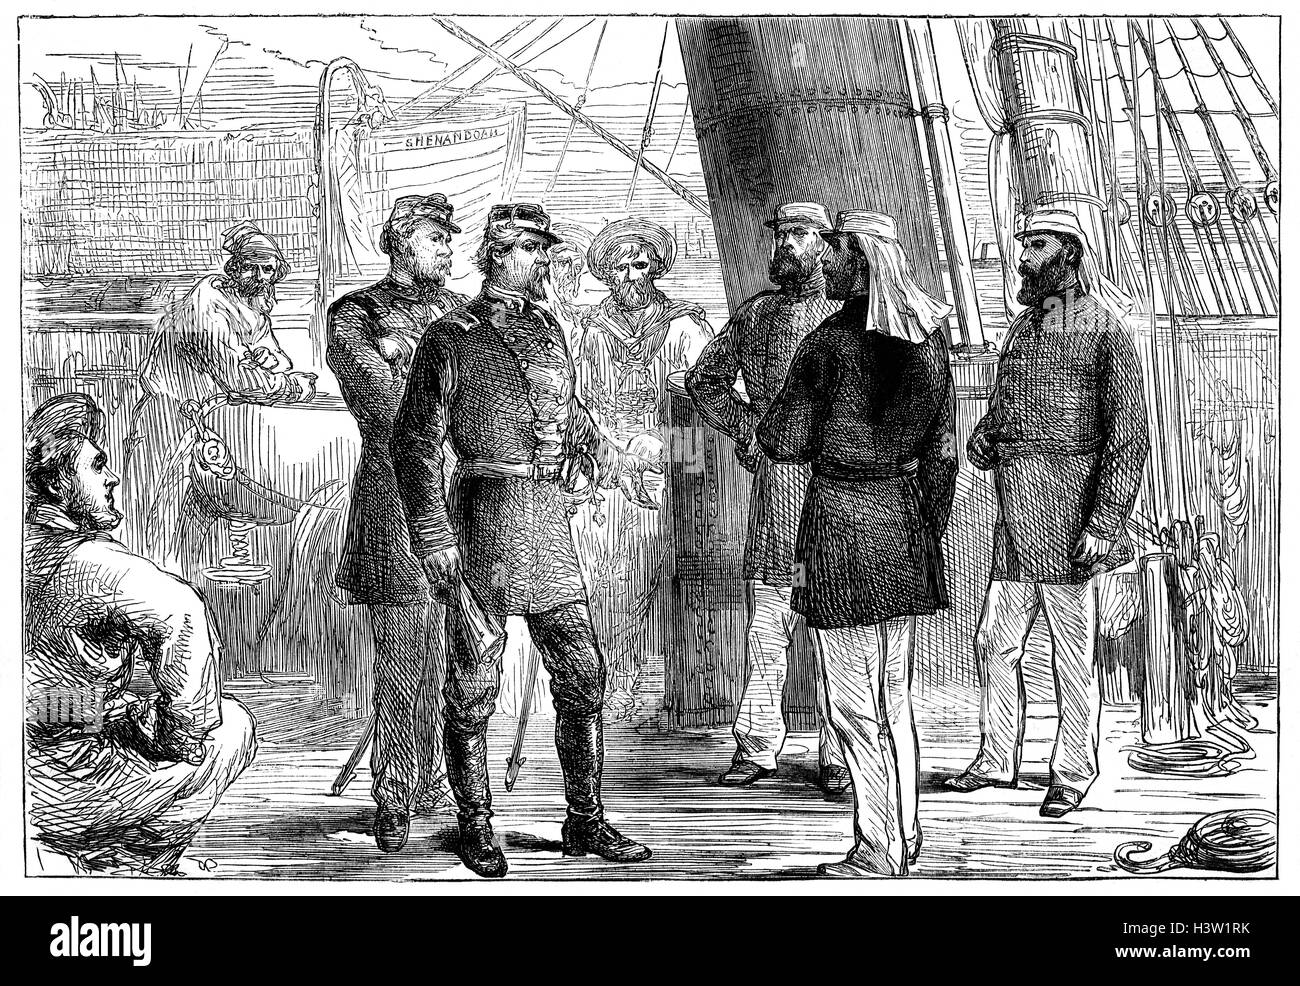 CSS Shenandoah was an iron-framed, teak-planked, full-rigged ship, with auxiliary steam power registered in Liverpool, England in 1865. She was purchased by the Confederacy and secretly moved from England to the Canary Islands, to convert her into a fighting ship. Over the next six weeks, Shenandoah scoured the South Atlantic, destroying or bonding over eight Union ships, before developing a problem with her propeller shaft, off the coast of South America. To avoid  patrolling Union warships she sailed  to Melbourne, 9600 kilometres away. Stock Photo